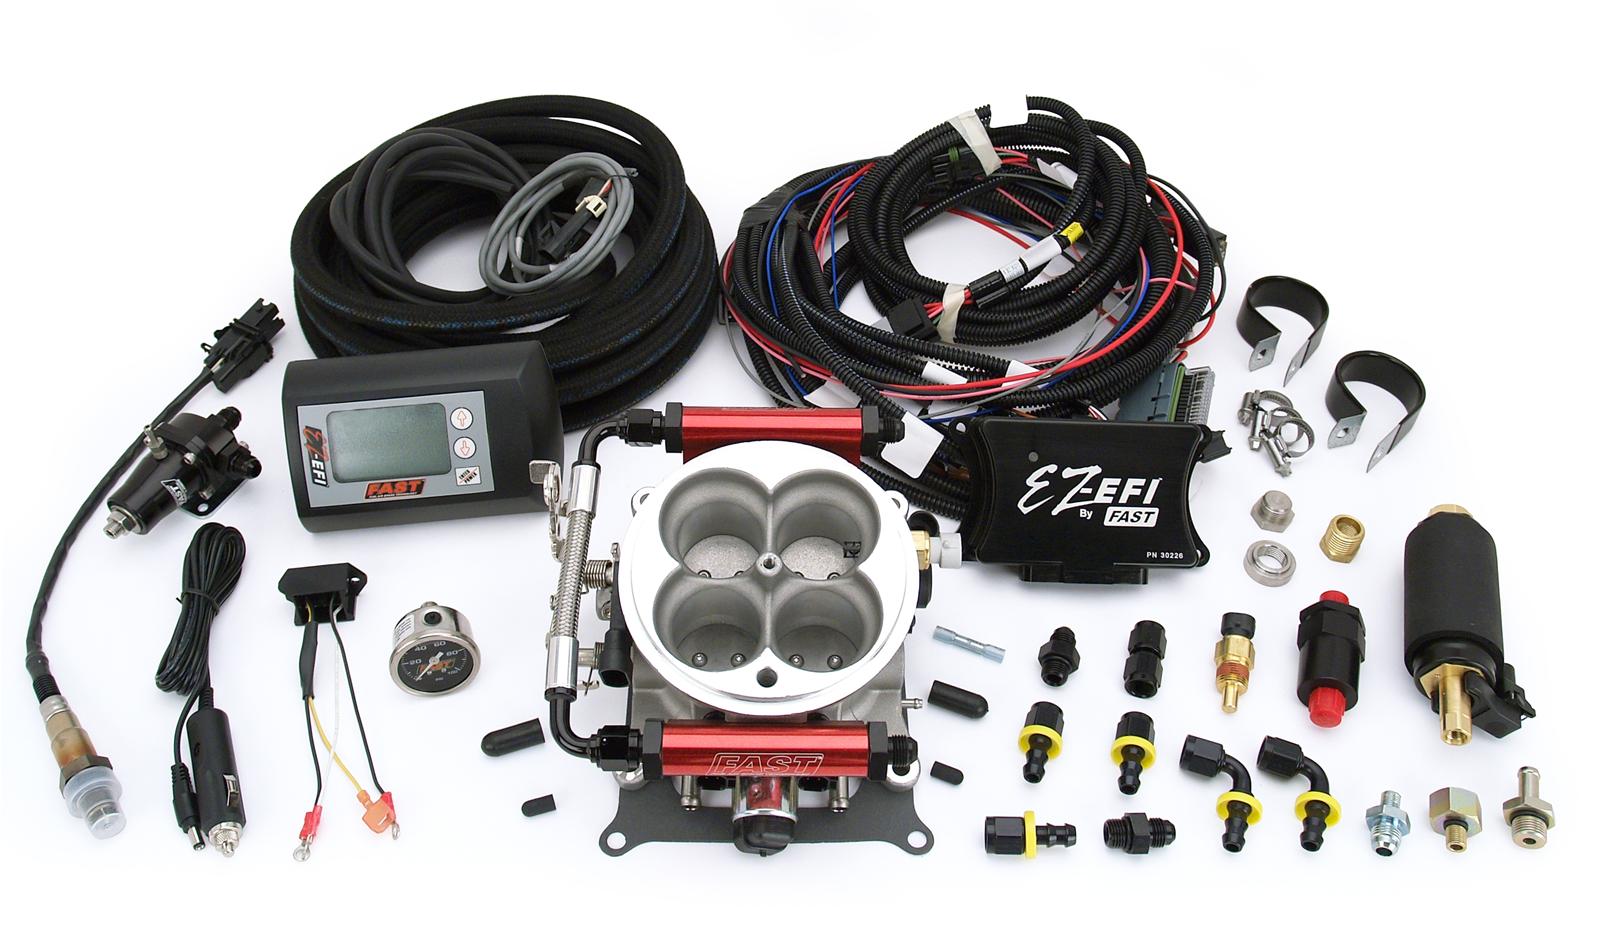 FAST EZ-EFI Self-Tuning Fuel Injection Systems 30227-KIT.